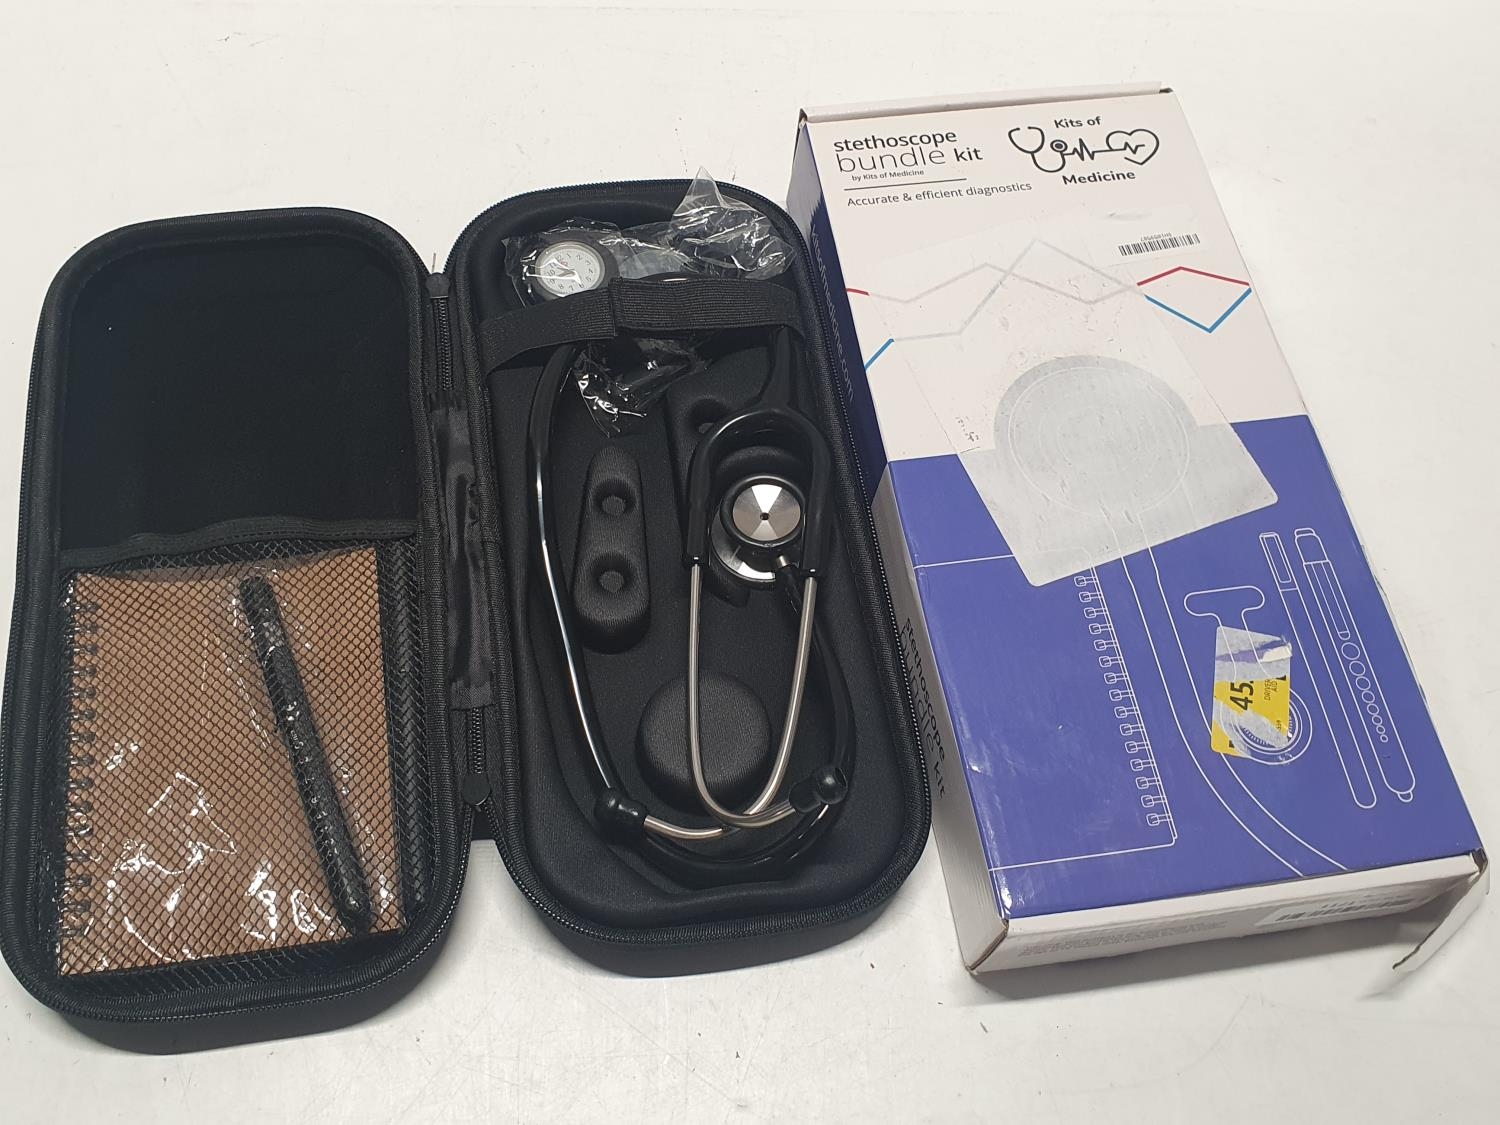 A boxed stethoscope